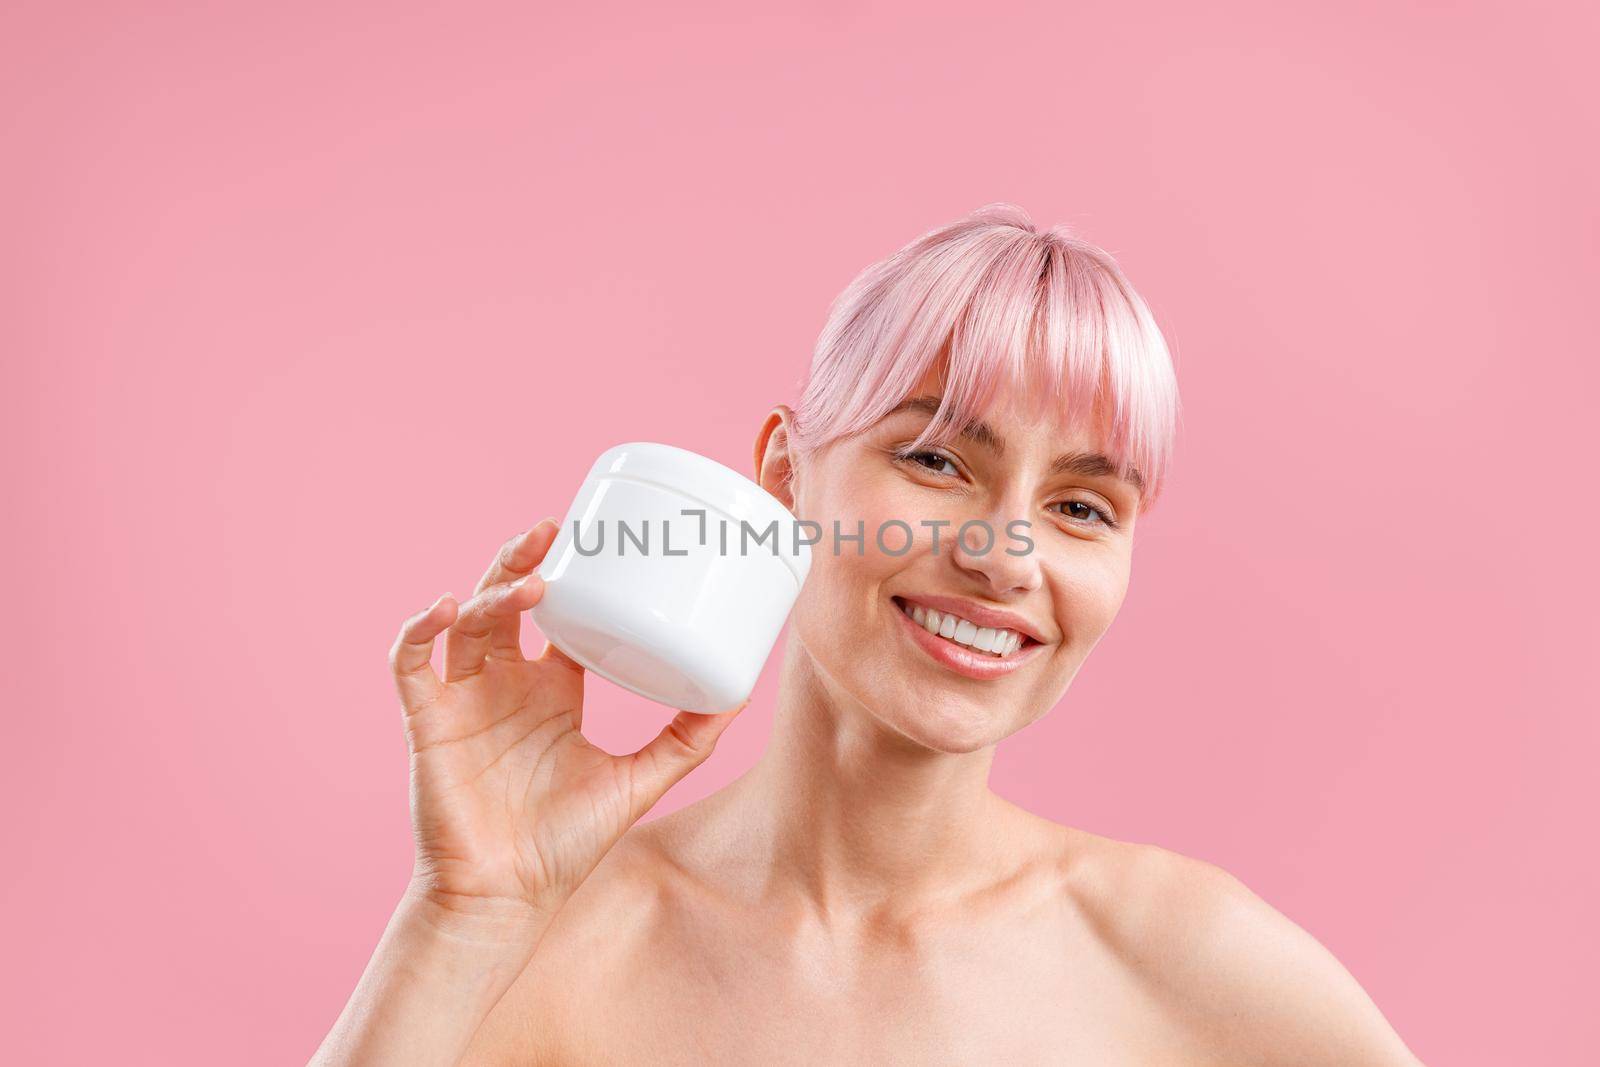 Portrait of smiling woman with pink hair holding white jar with moisturizing body lotion after shower isolated over pink background by Yaroslav_astakhov